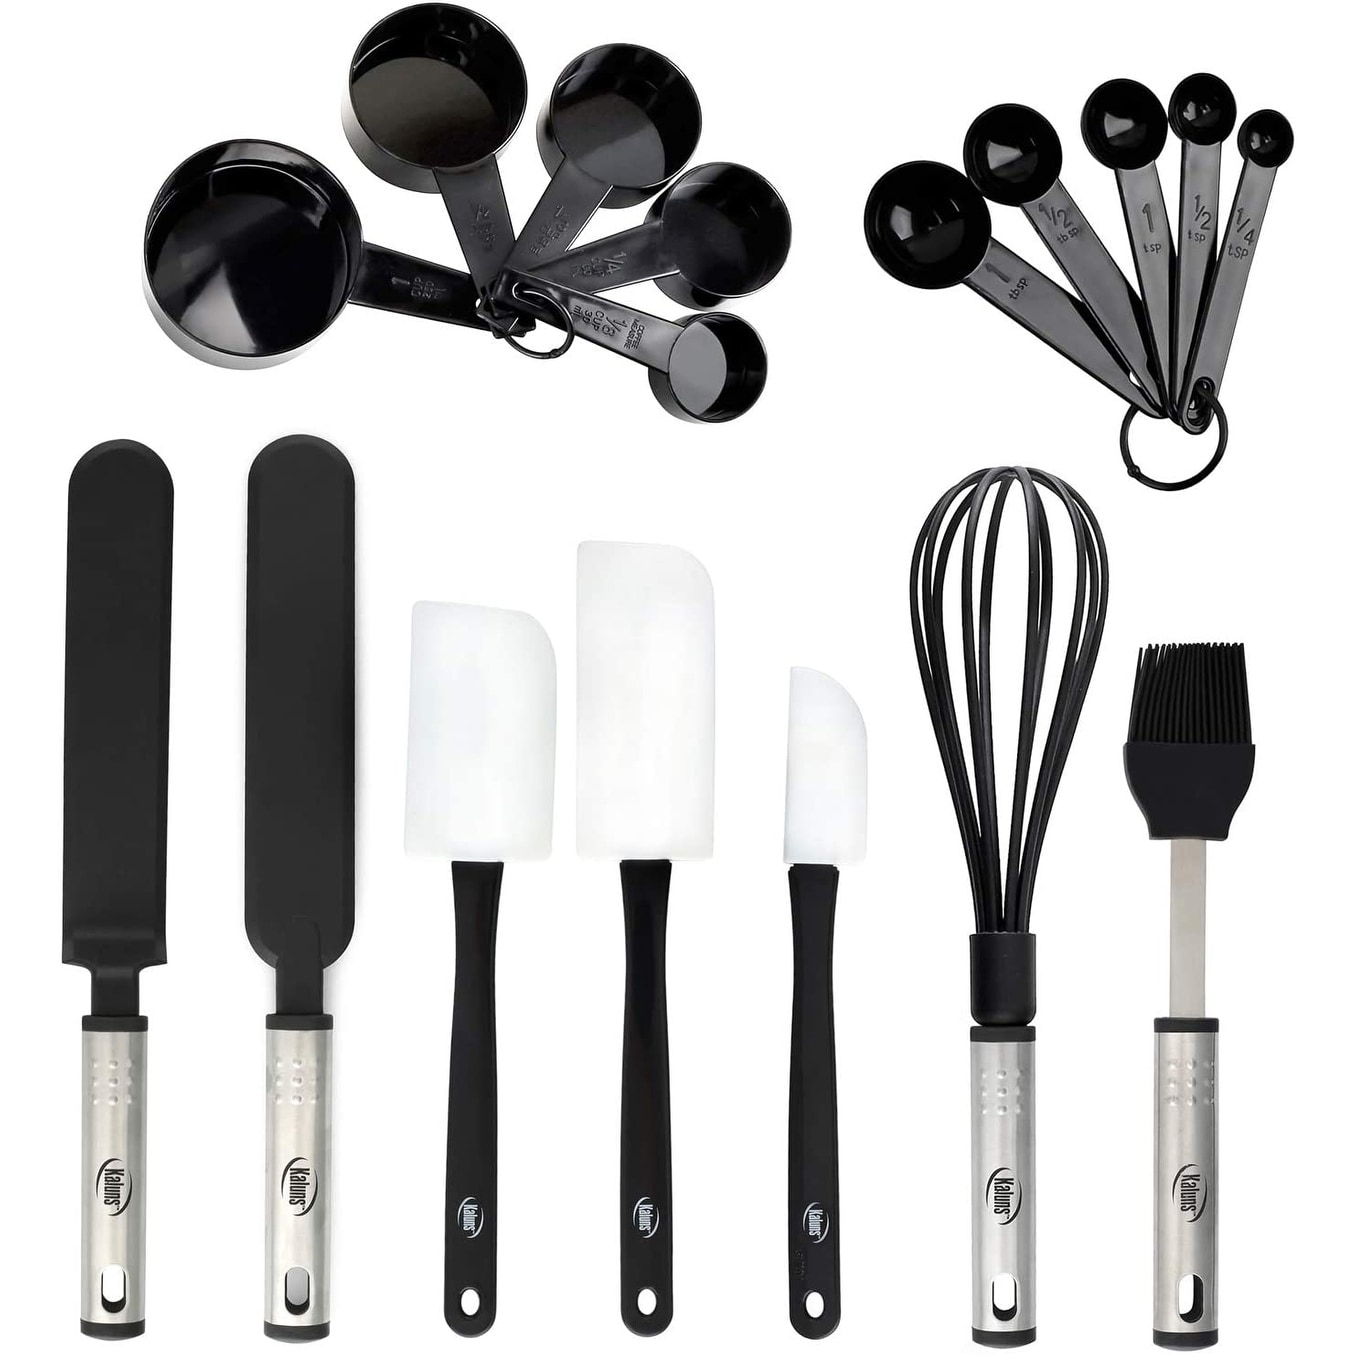 https://ak1.ostkcdn.com/images/products/is/images/direct/52f56e4369d475c63b15f1200530399d5897d384/Kitchen-Utensil-set---Nylon---Stainless-Steel-Cooking---Baking-Supplies---Non-Stick-and-Heat-Resistant-Cookware-set-17-Pieces.jpg